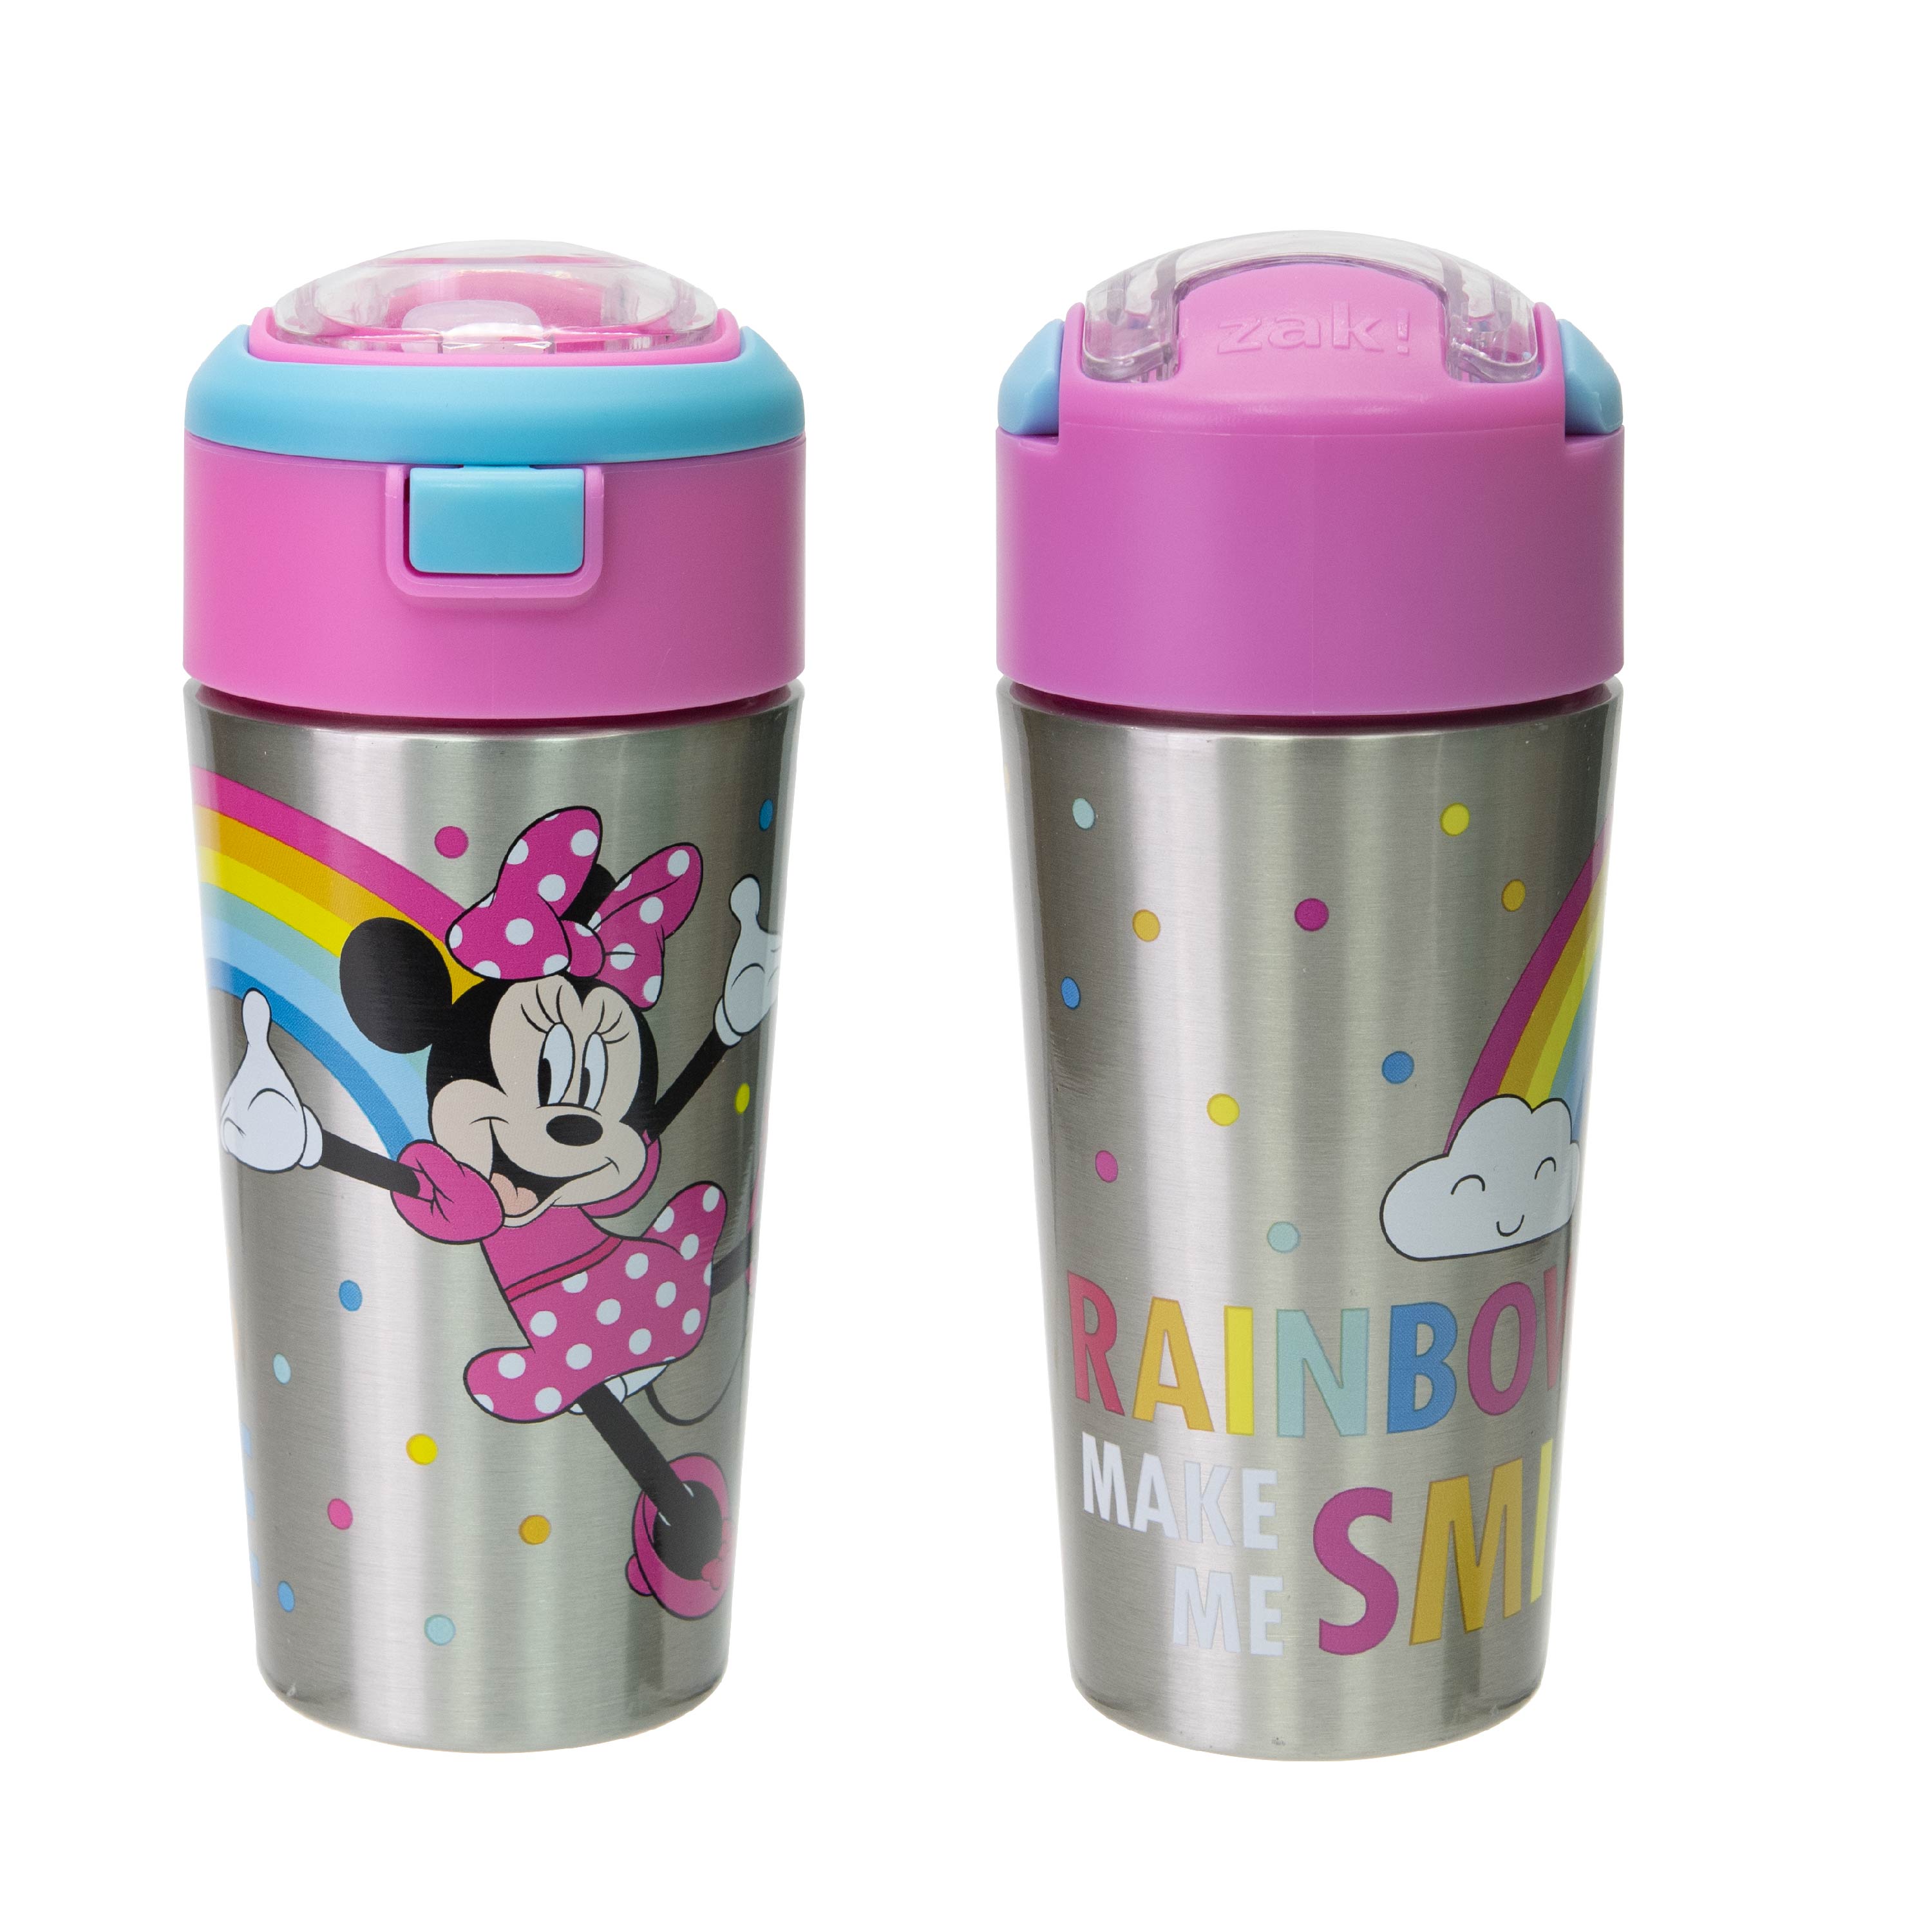 Disney 12 ounce Vacuum Insulated Reusable Stainless Steel Water Bottle, Minnie Mouse slideshow image 7